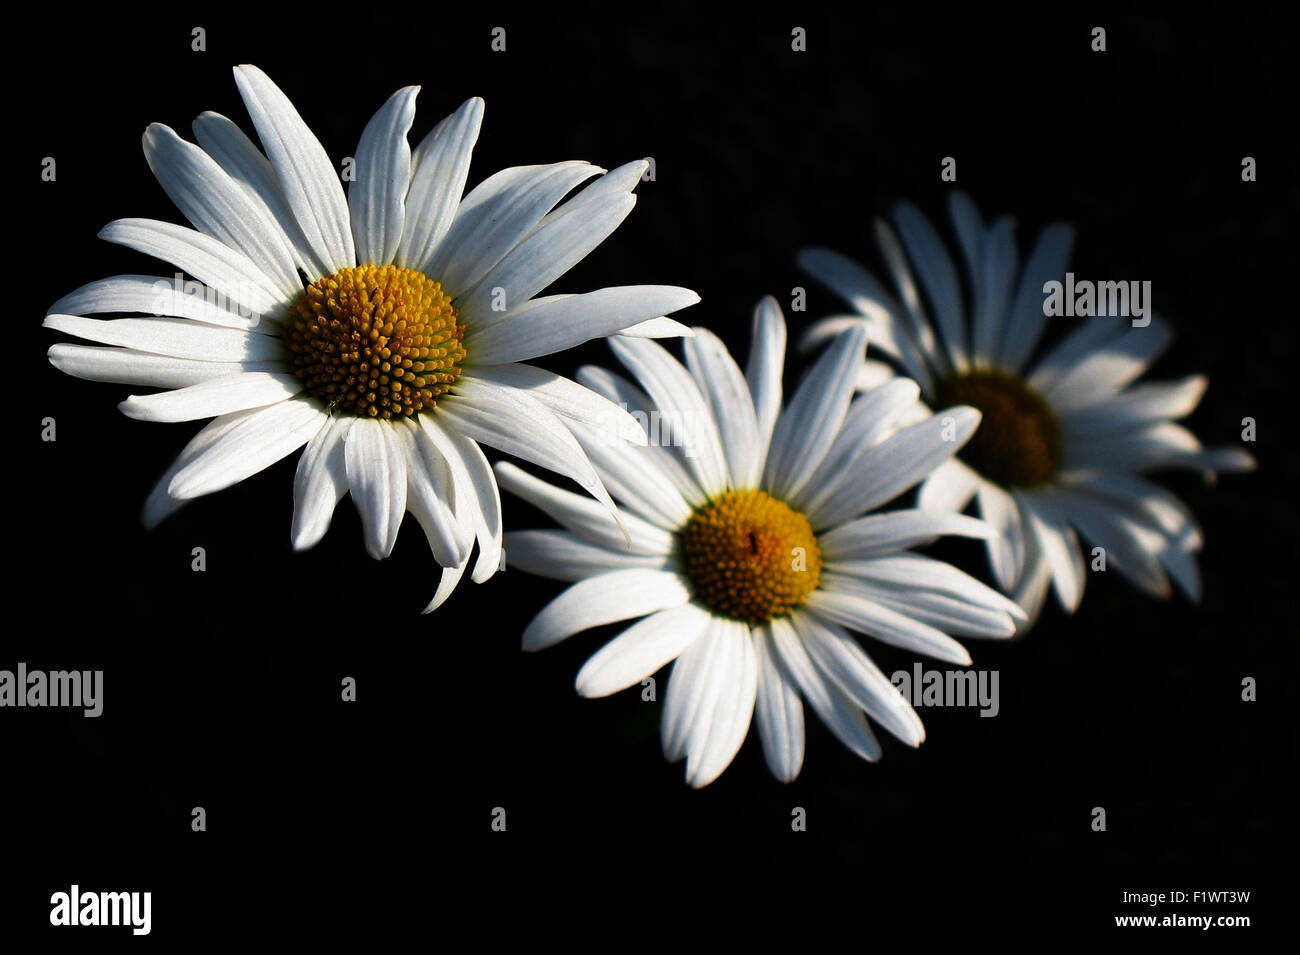 daisies on the black background. Stock Photo